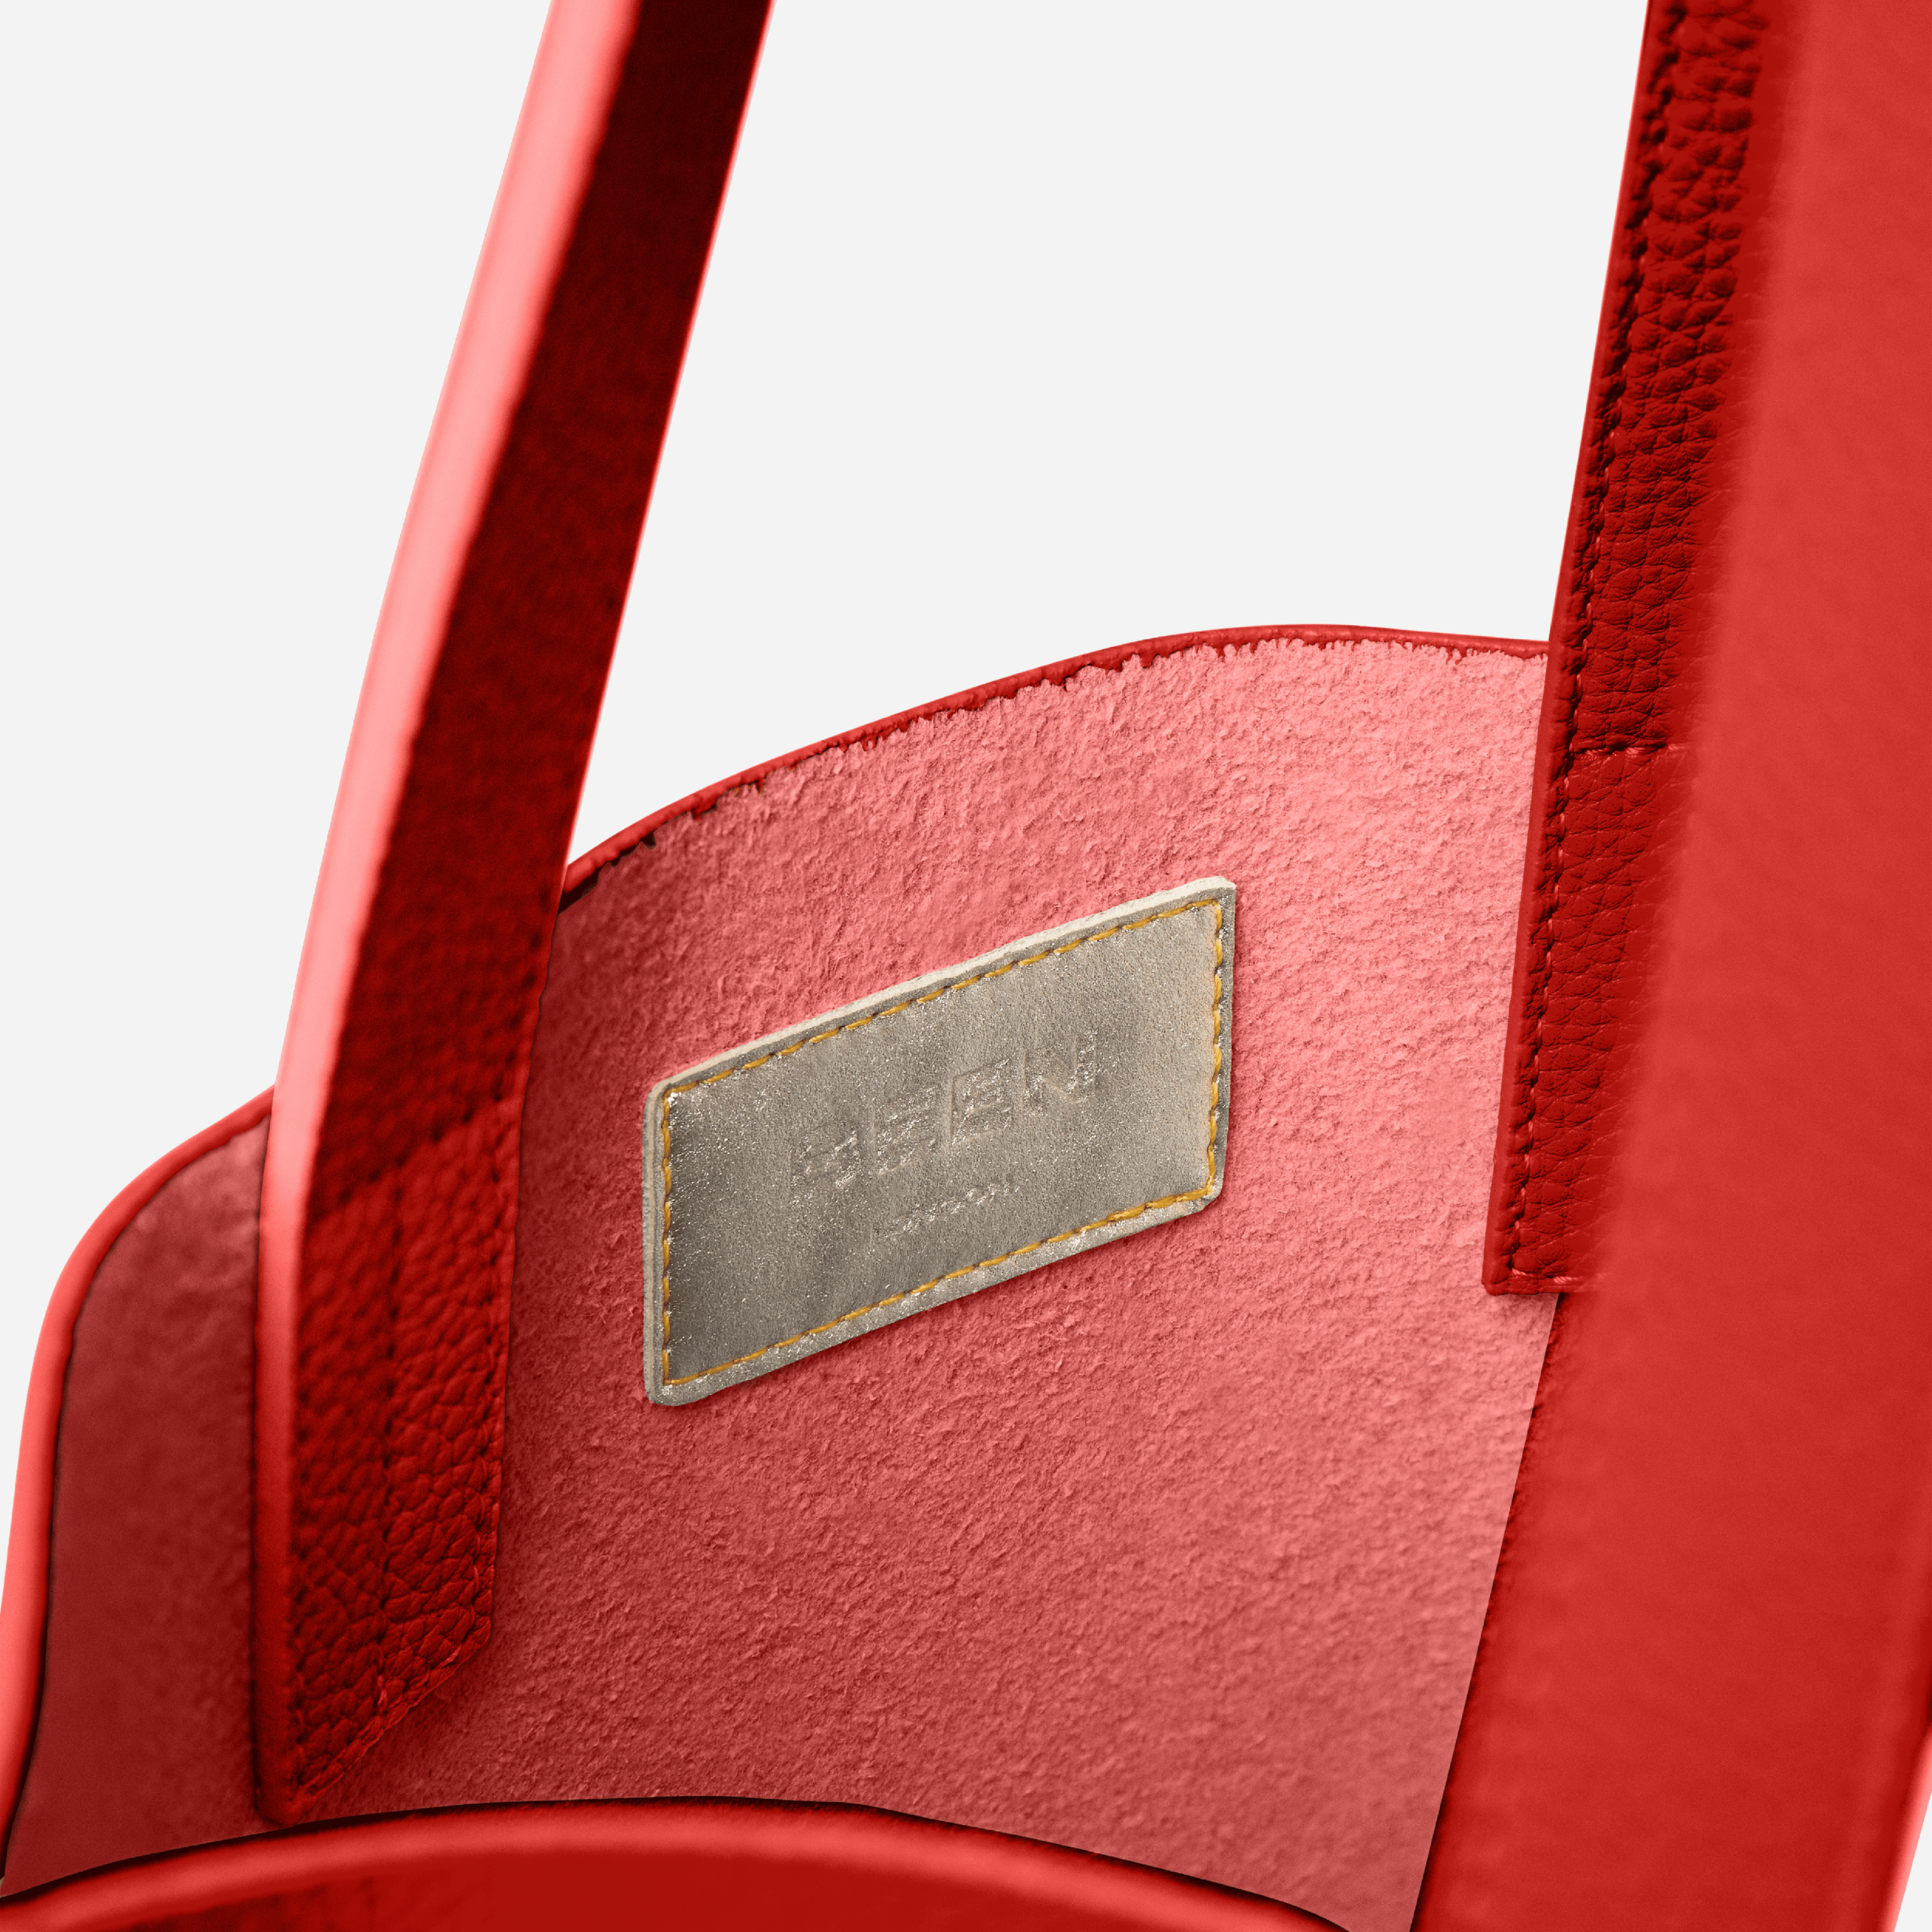 East Tote in Coral Red interior logo